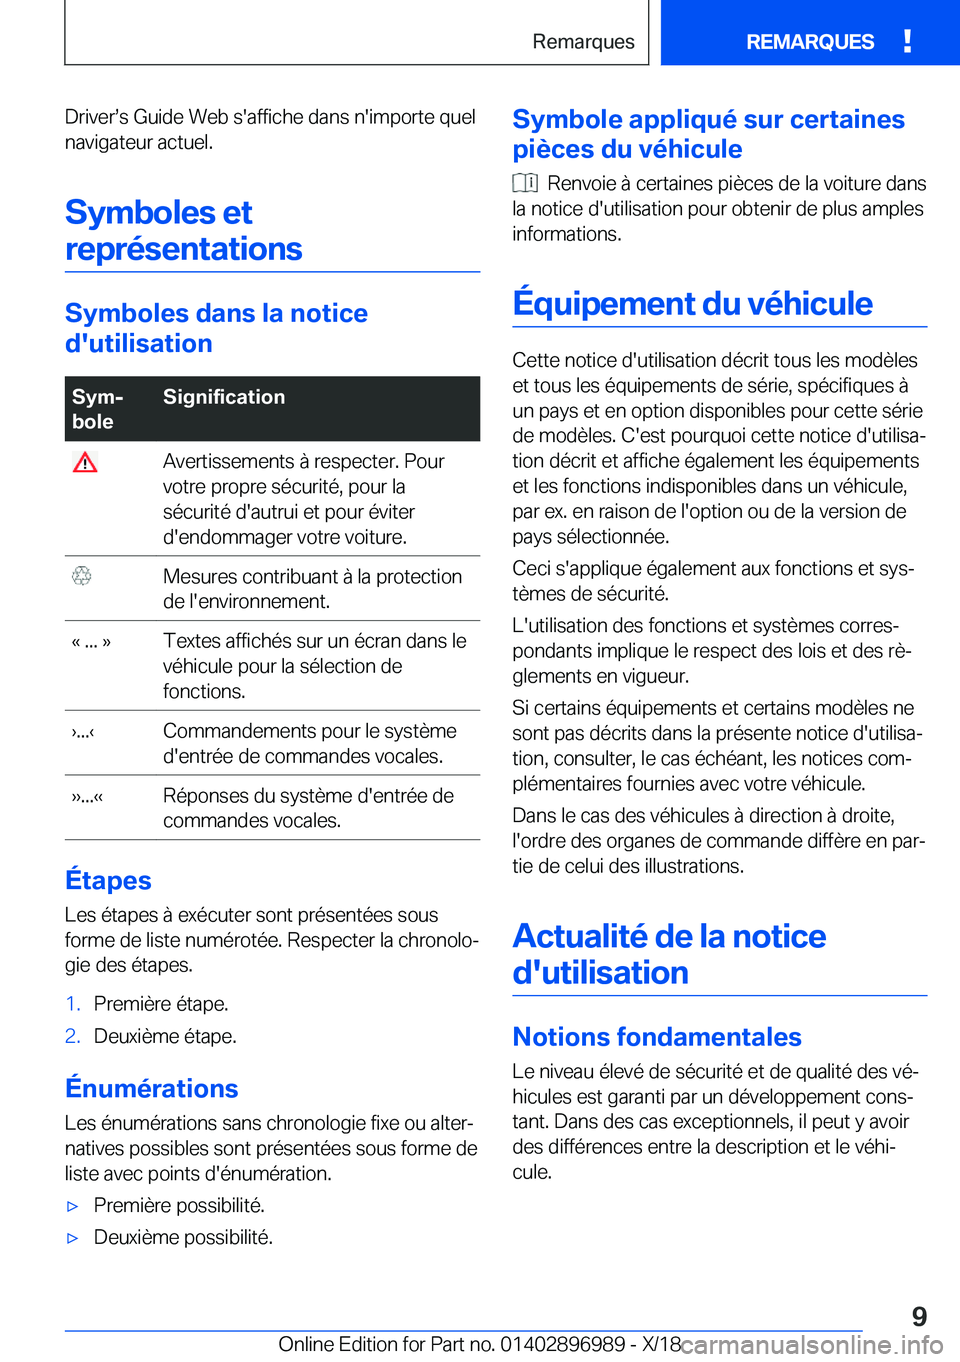 BMW Z4 2019  Notices Demploi (in French) �D�r�i�v�e�rs�s��G�u�i�d�e��W�e�b��s�'�a�f�f�i�c�h�e��d�a�n�s��n�'�i�m�p�o�r�t�e��q�u�e�l�n�a�v�i�g�a�t�e�u�r��a�c�t�u�e�l�.
�S�y�m�b�o�l�e�s��e�t�r�e�p�r�é�s�e�n�t�a�t�i�o�n�s
�S�y�